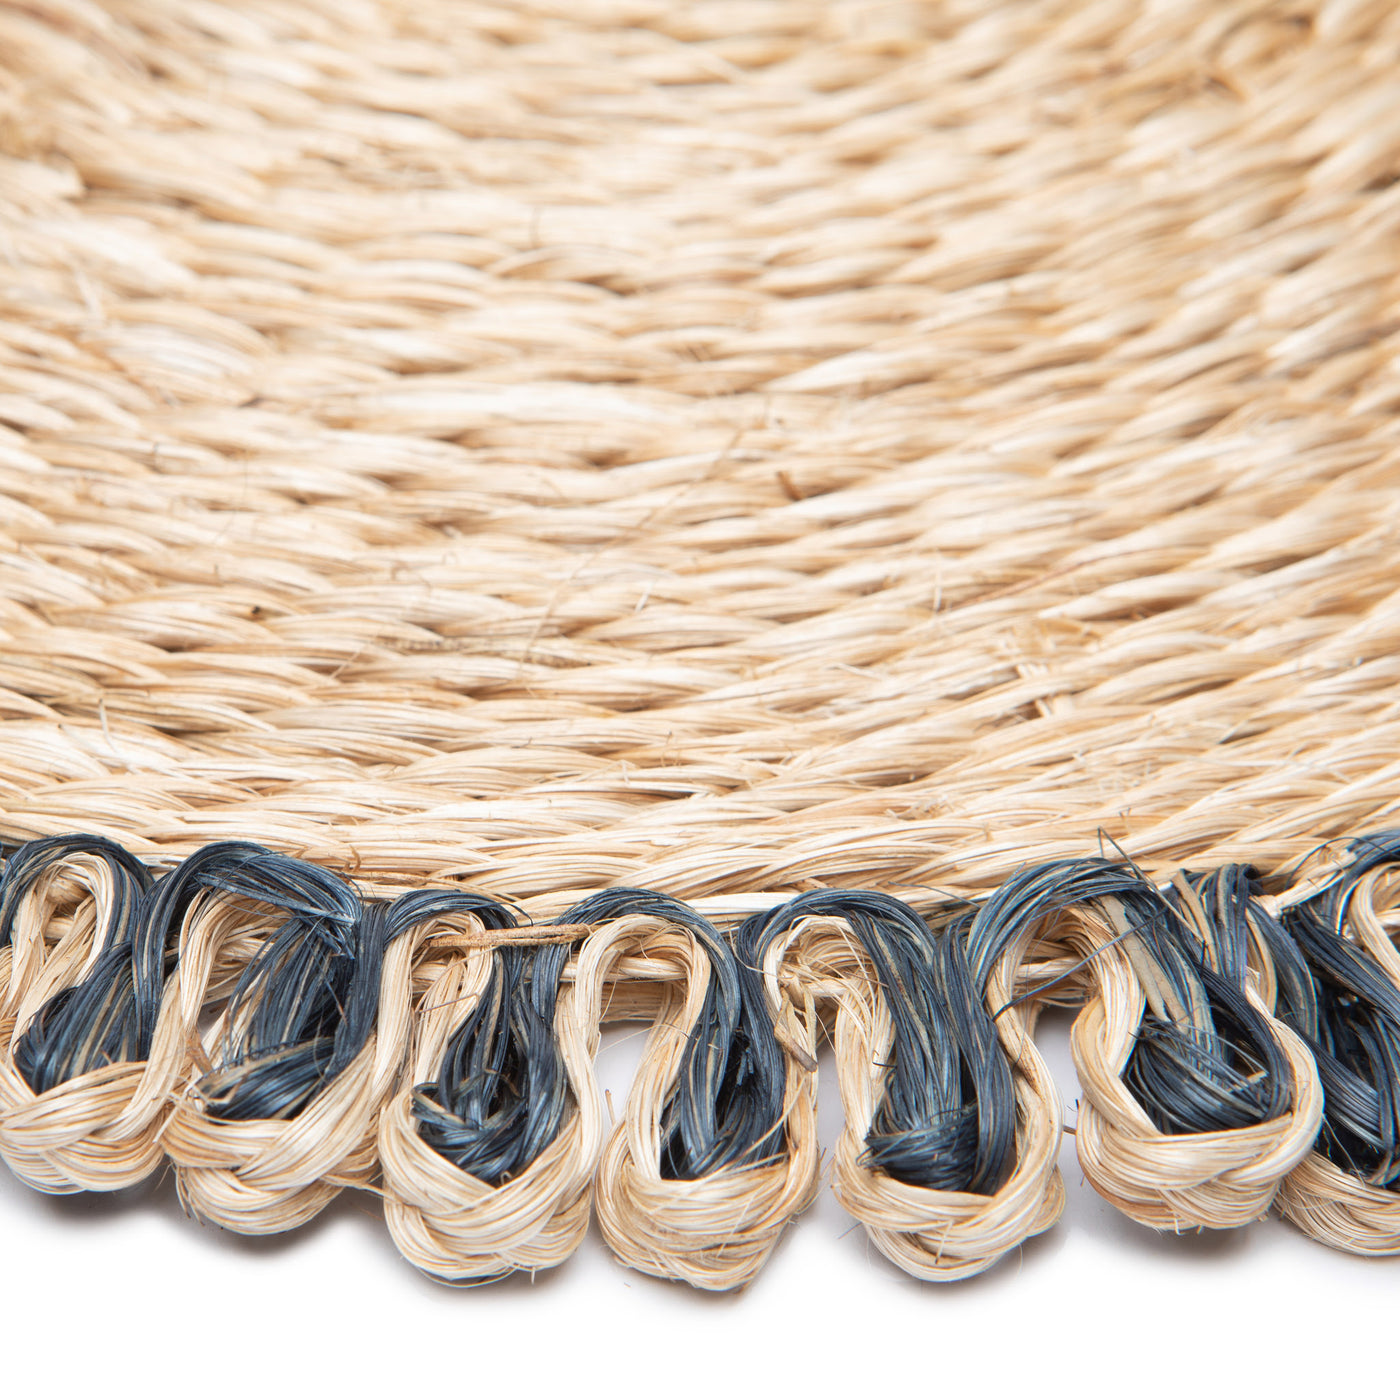 Loopy Abaca Natural & Navy 15" Round - Set of 4